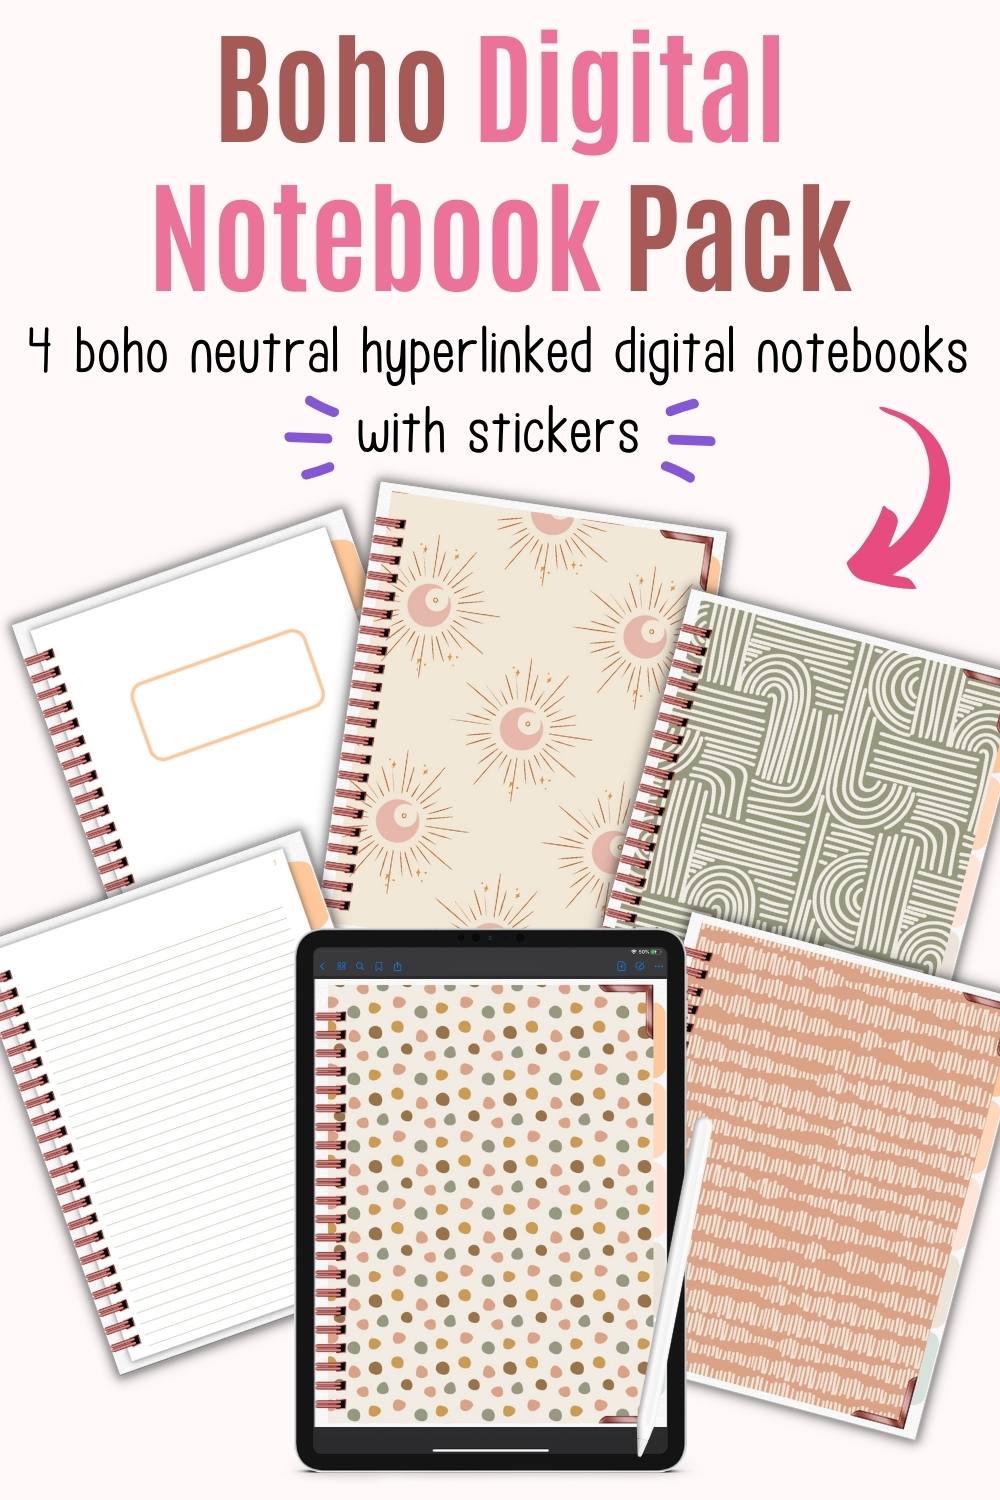 Text "boho digital notebook pack" with a preview of four boho neutral themed digital notebook covers and two interior pages